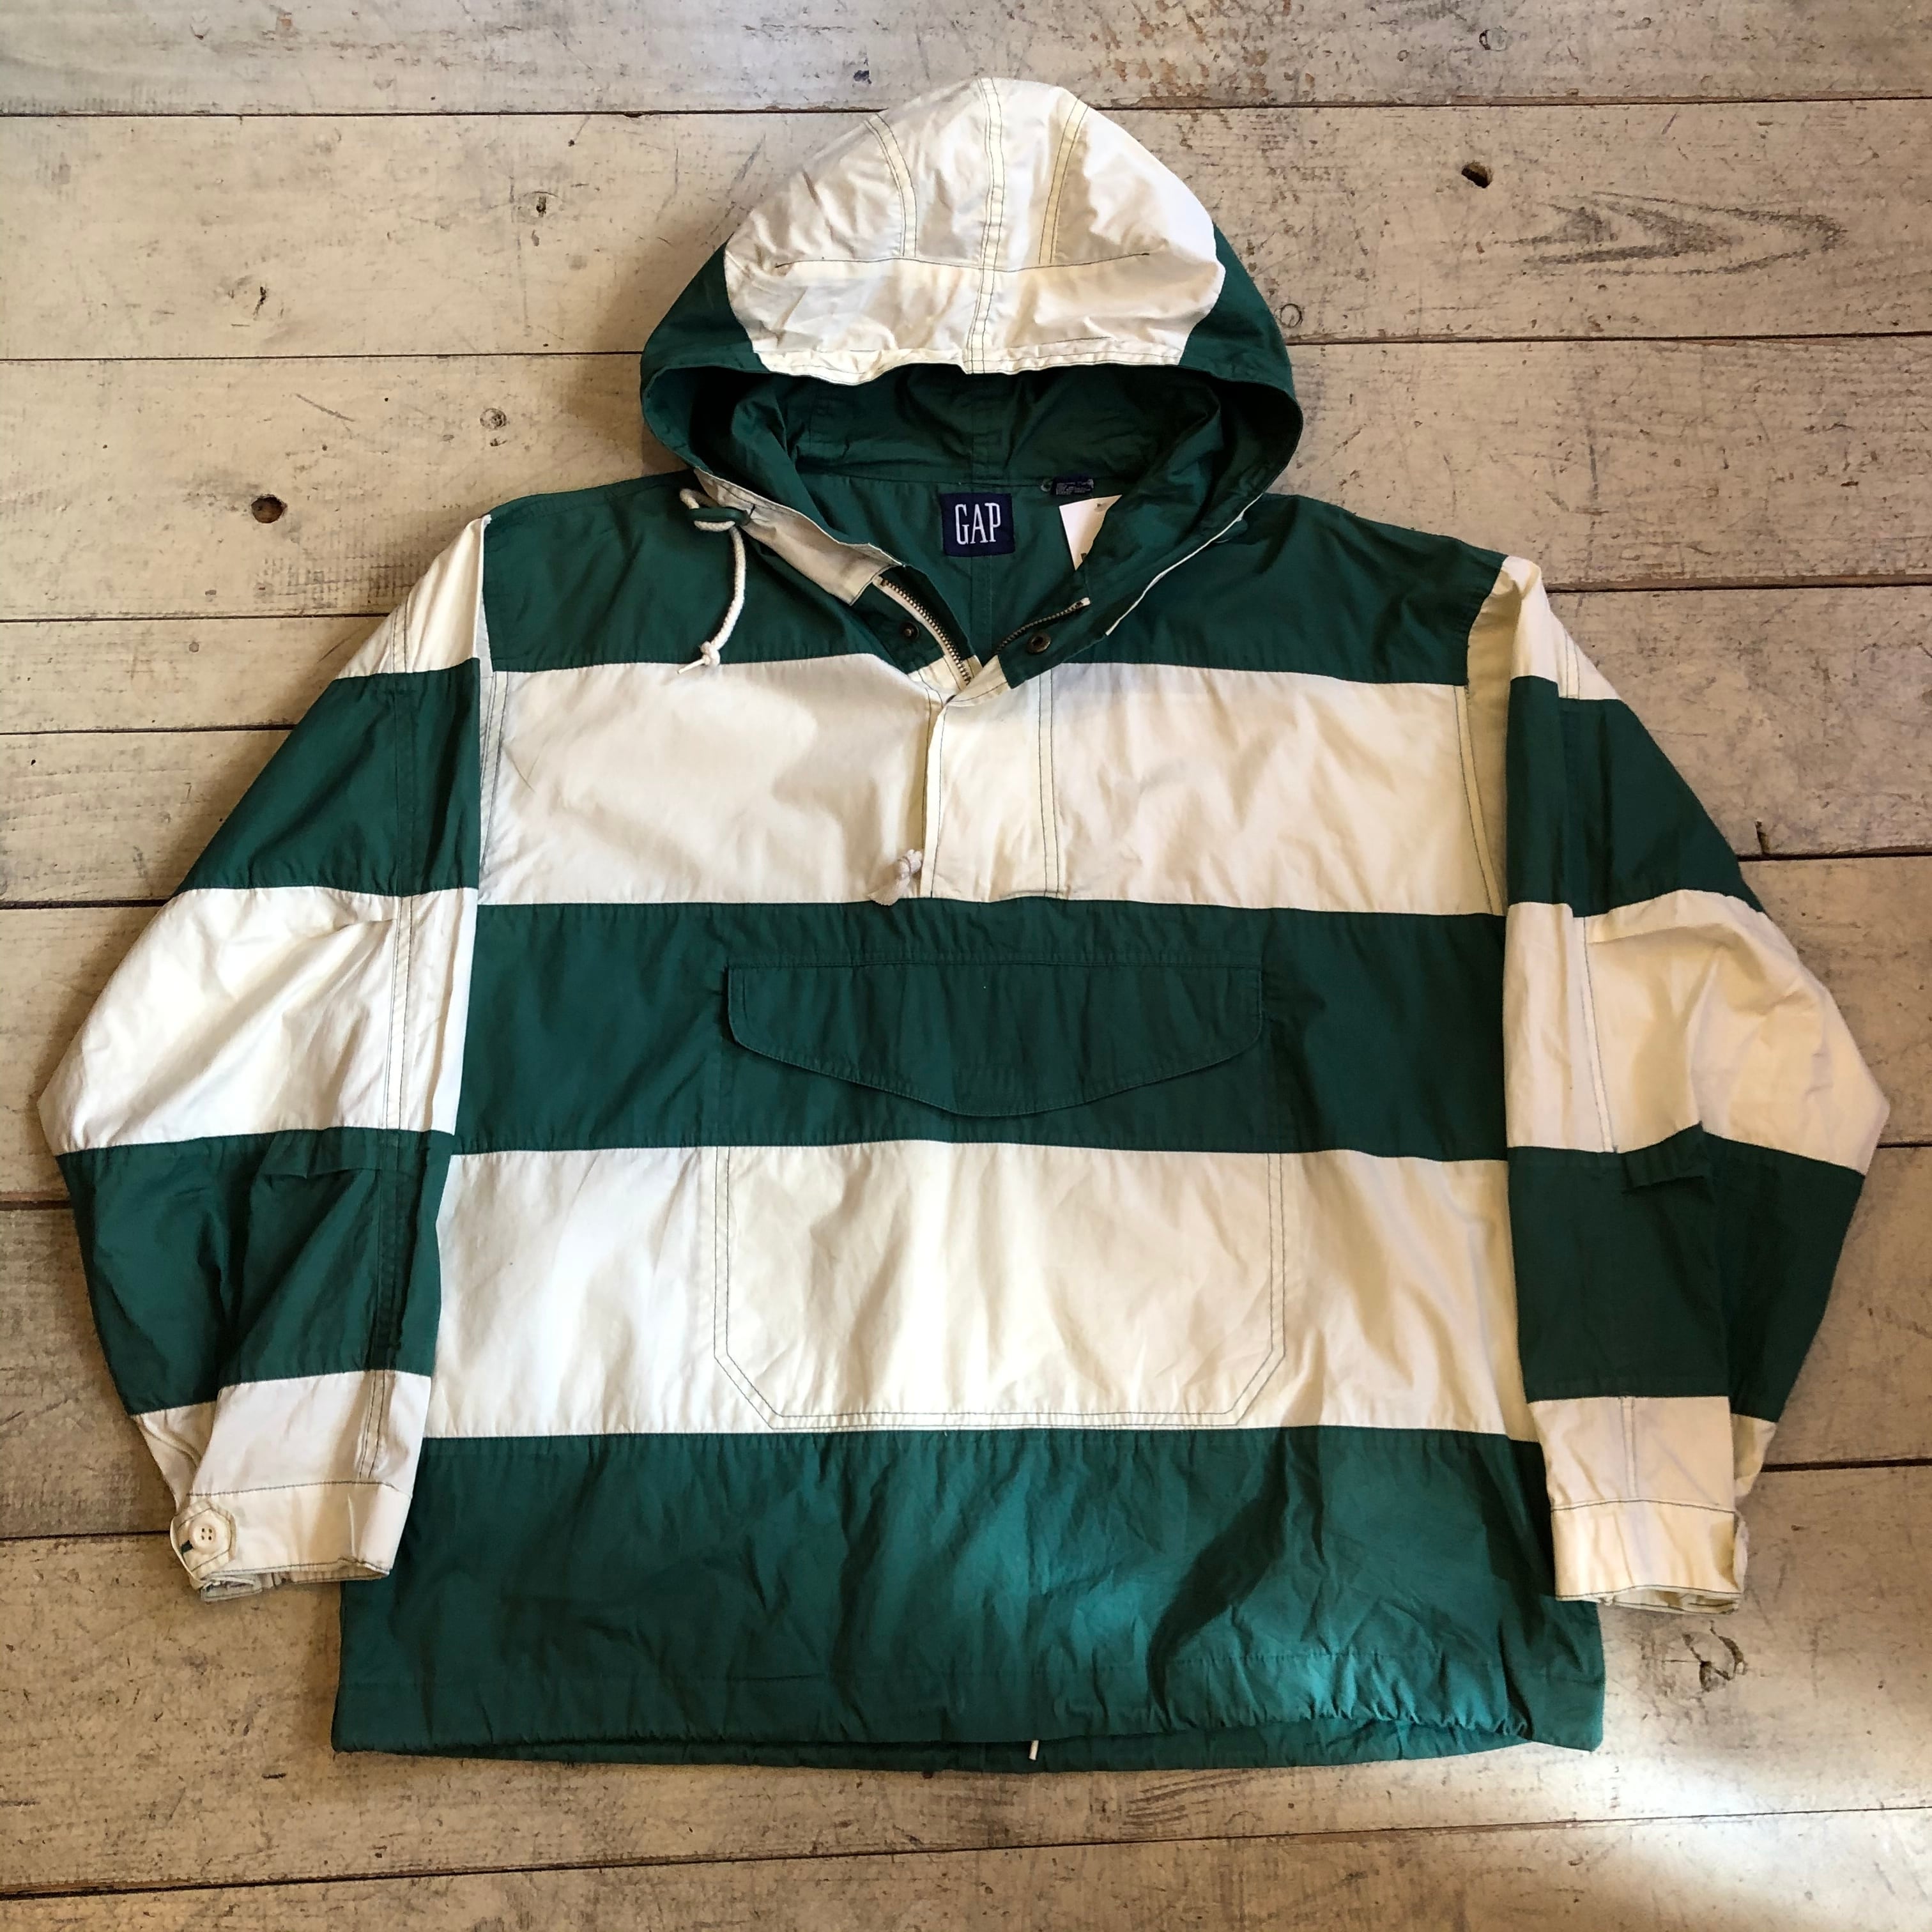 90s GAP border cotton anorak | What'z up